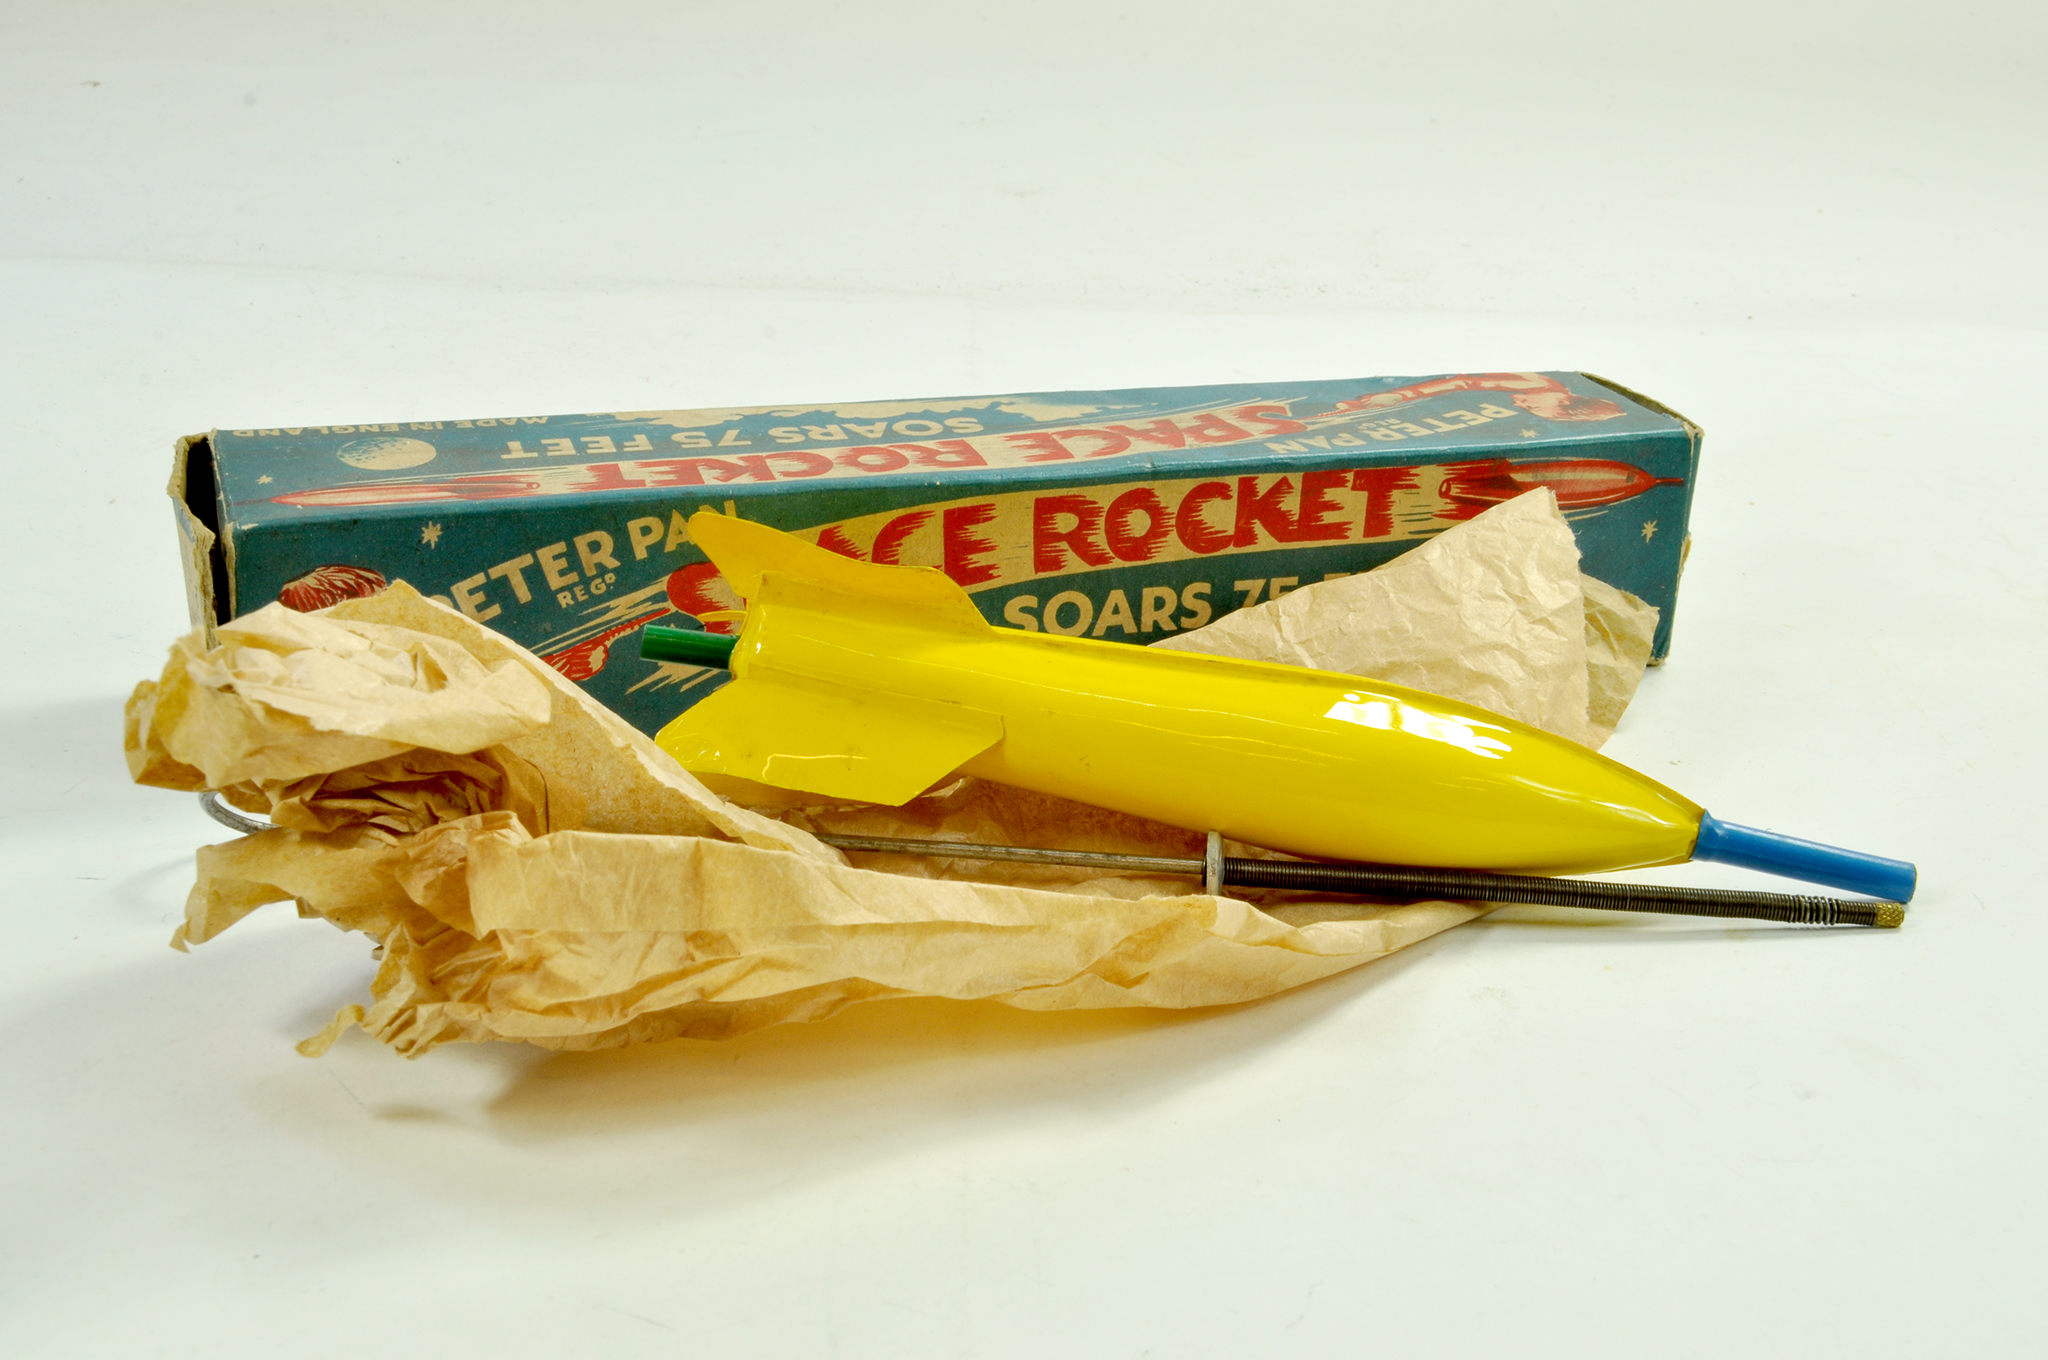 Peter Pan Plastic Space Rocket Toy. Appears very good to excellent, likely never played with in